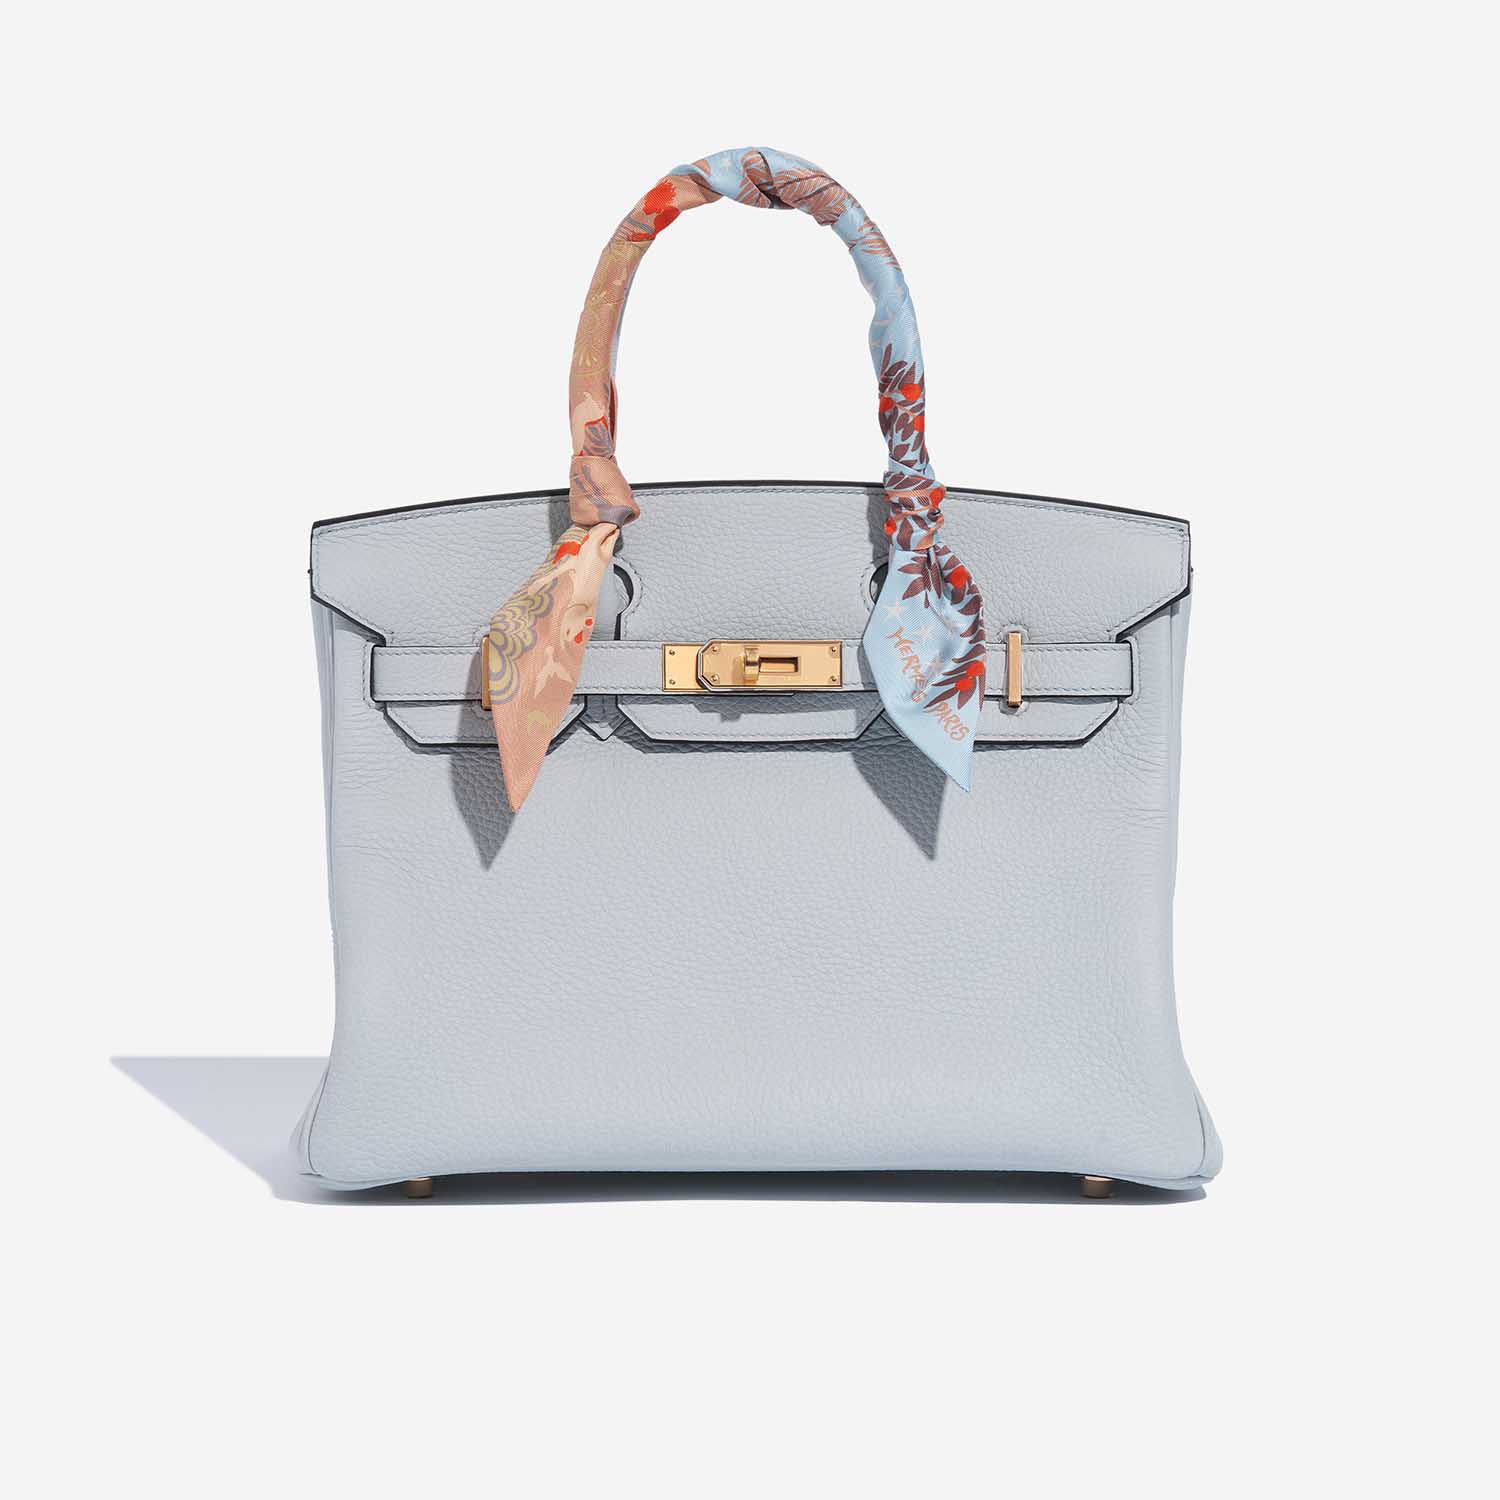 Hermes Birkin 30 in Gris Pale with Perle and Mykonos Blue Stripes